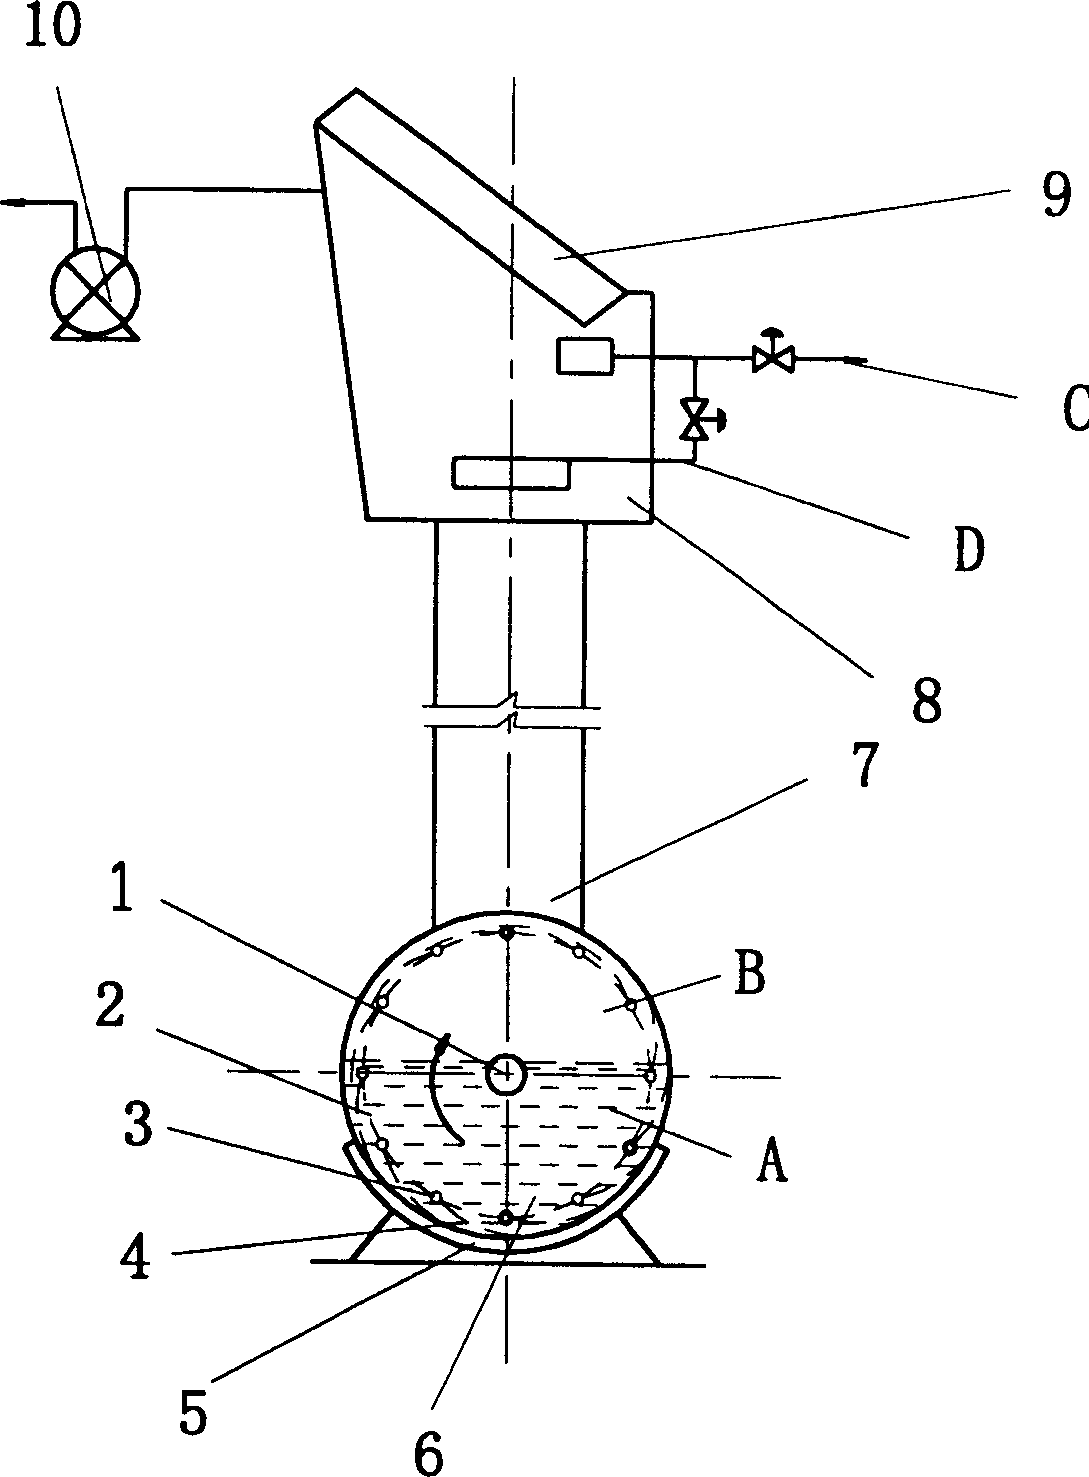 Method and apparatus for preparing high-content polyenoic ethy lester